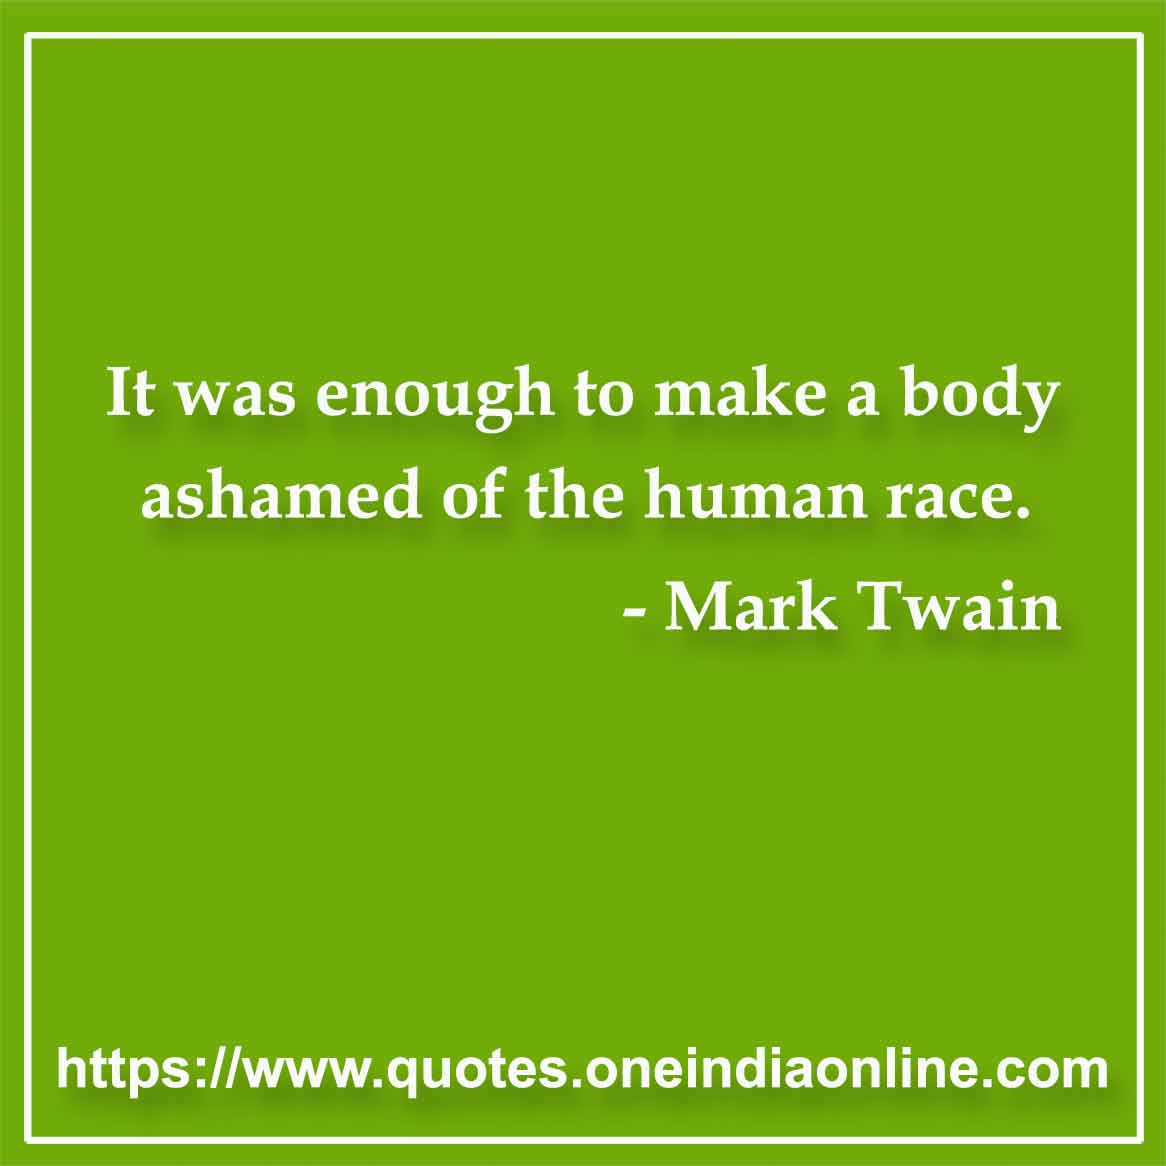 It was enough to make a body ashamed of the human race.

- Mark Twain Quotes